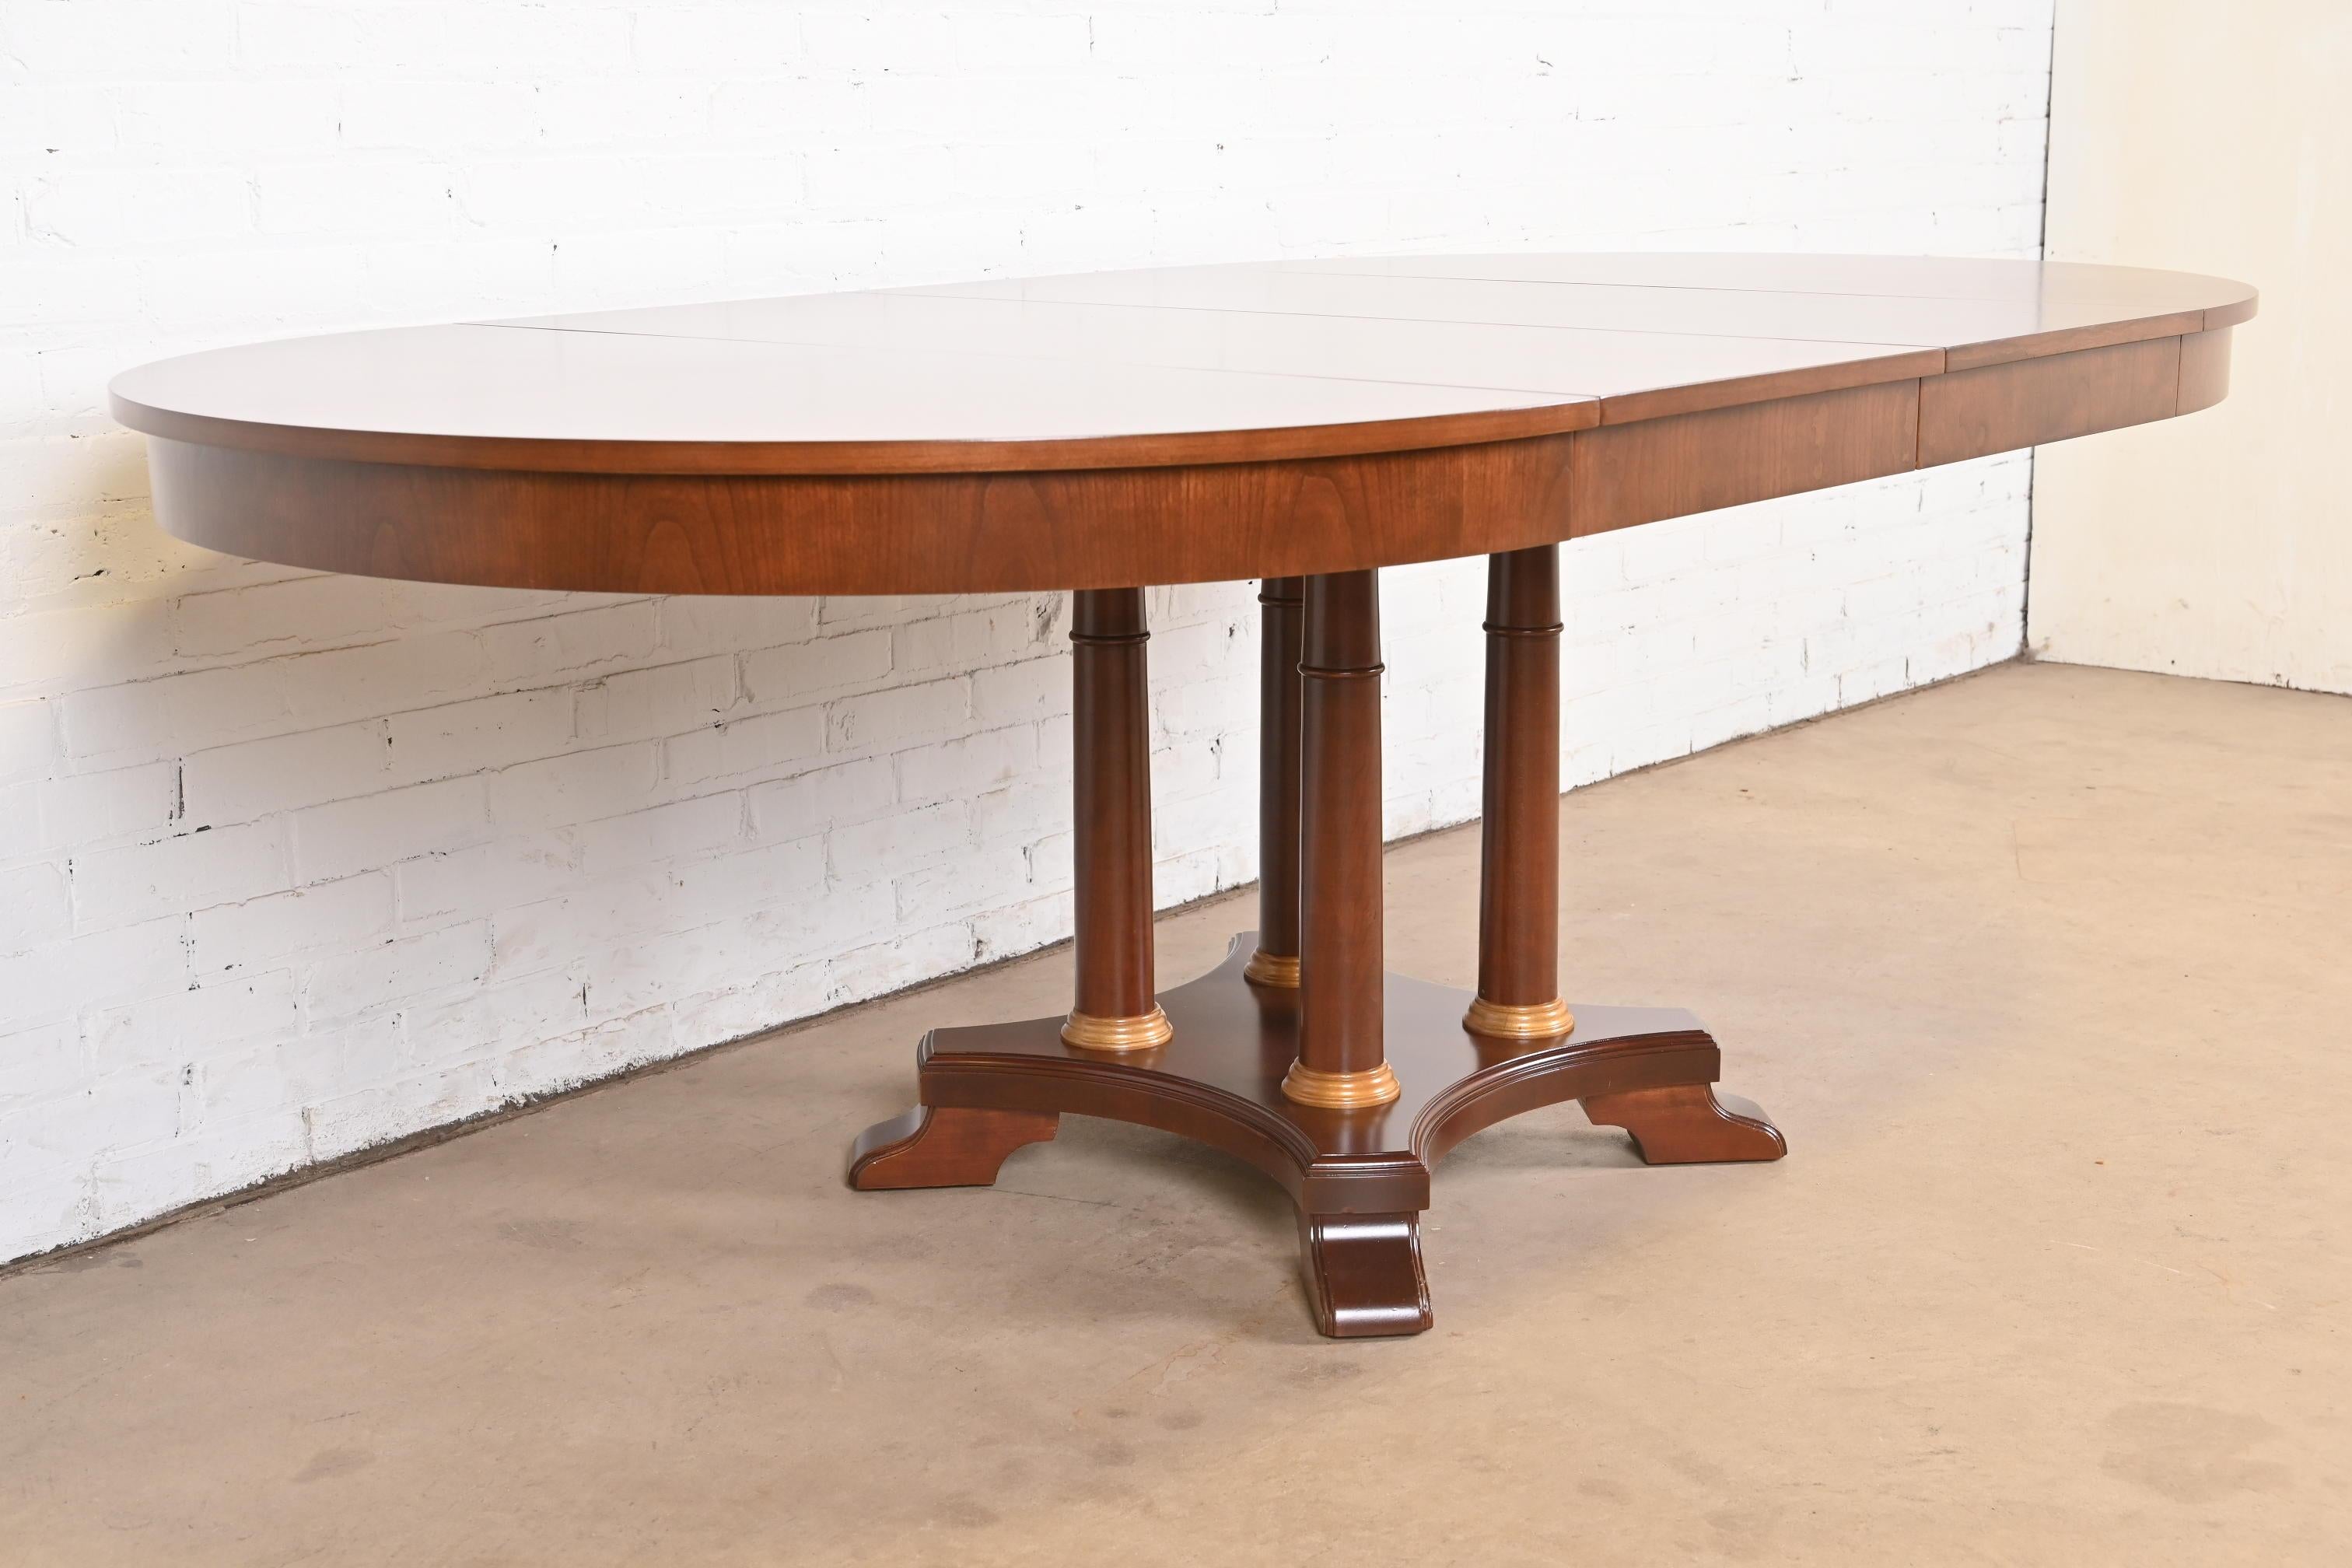 Neoclassical or Empire Cherry Wood Pedestal Dining Table, Newly Refinished For Sale 2